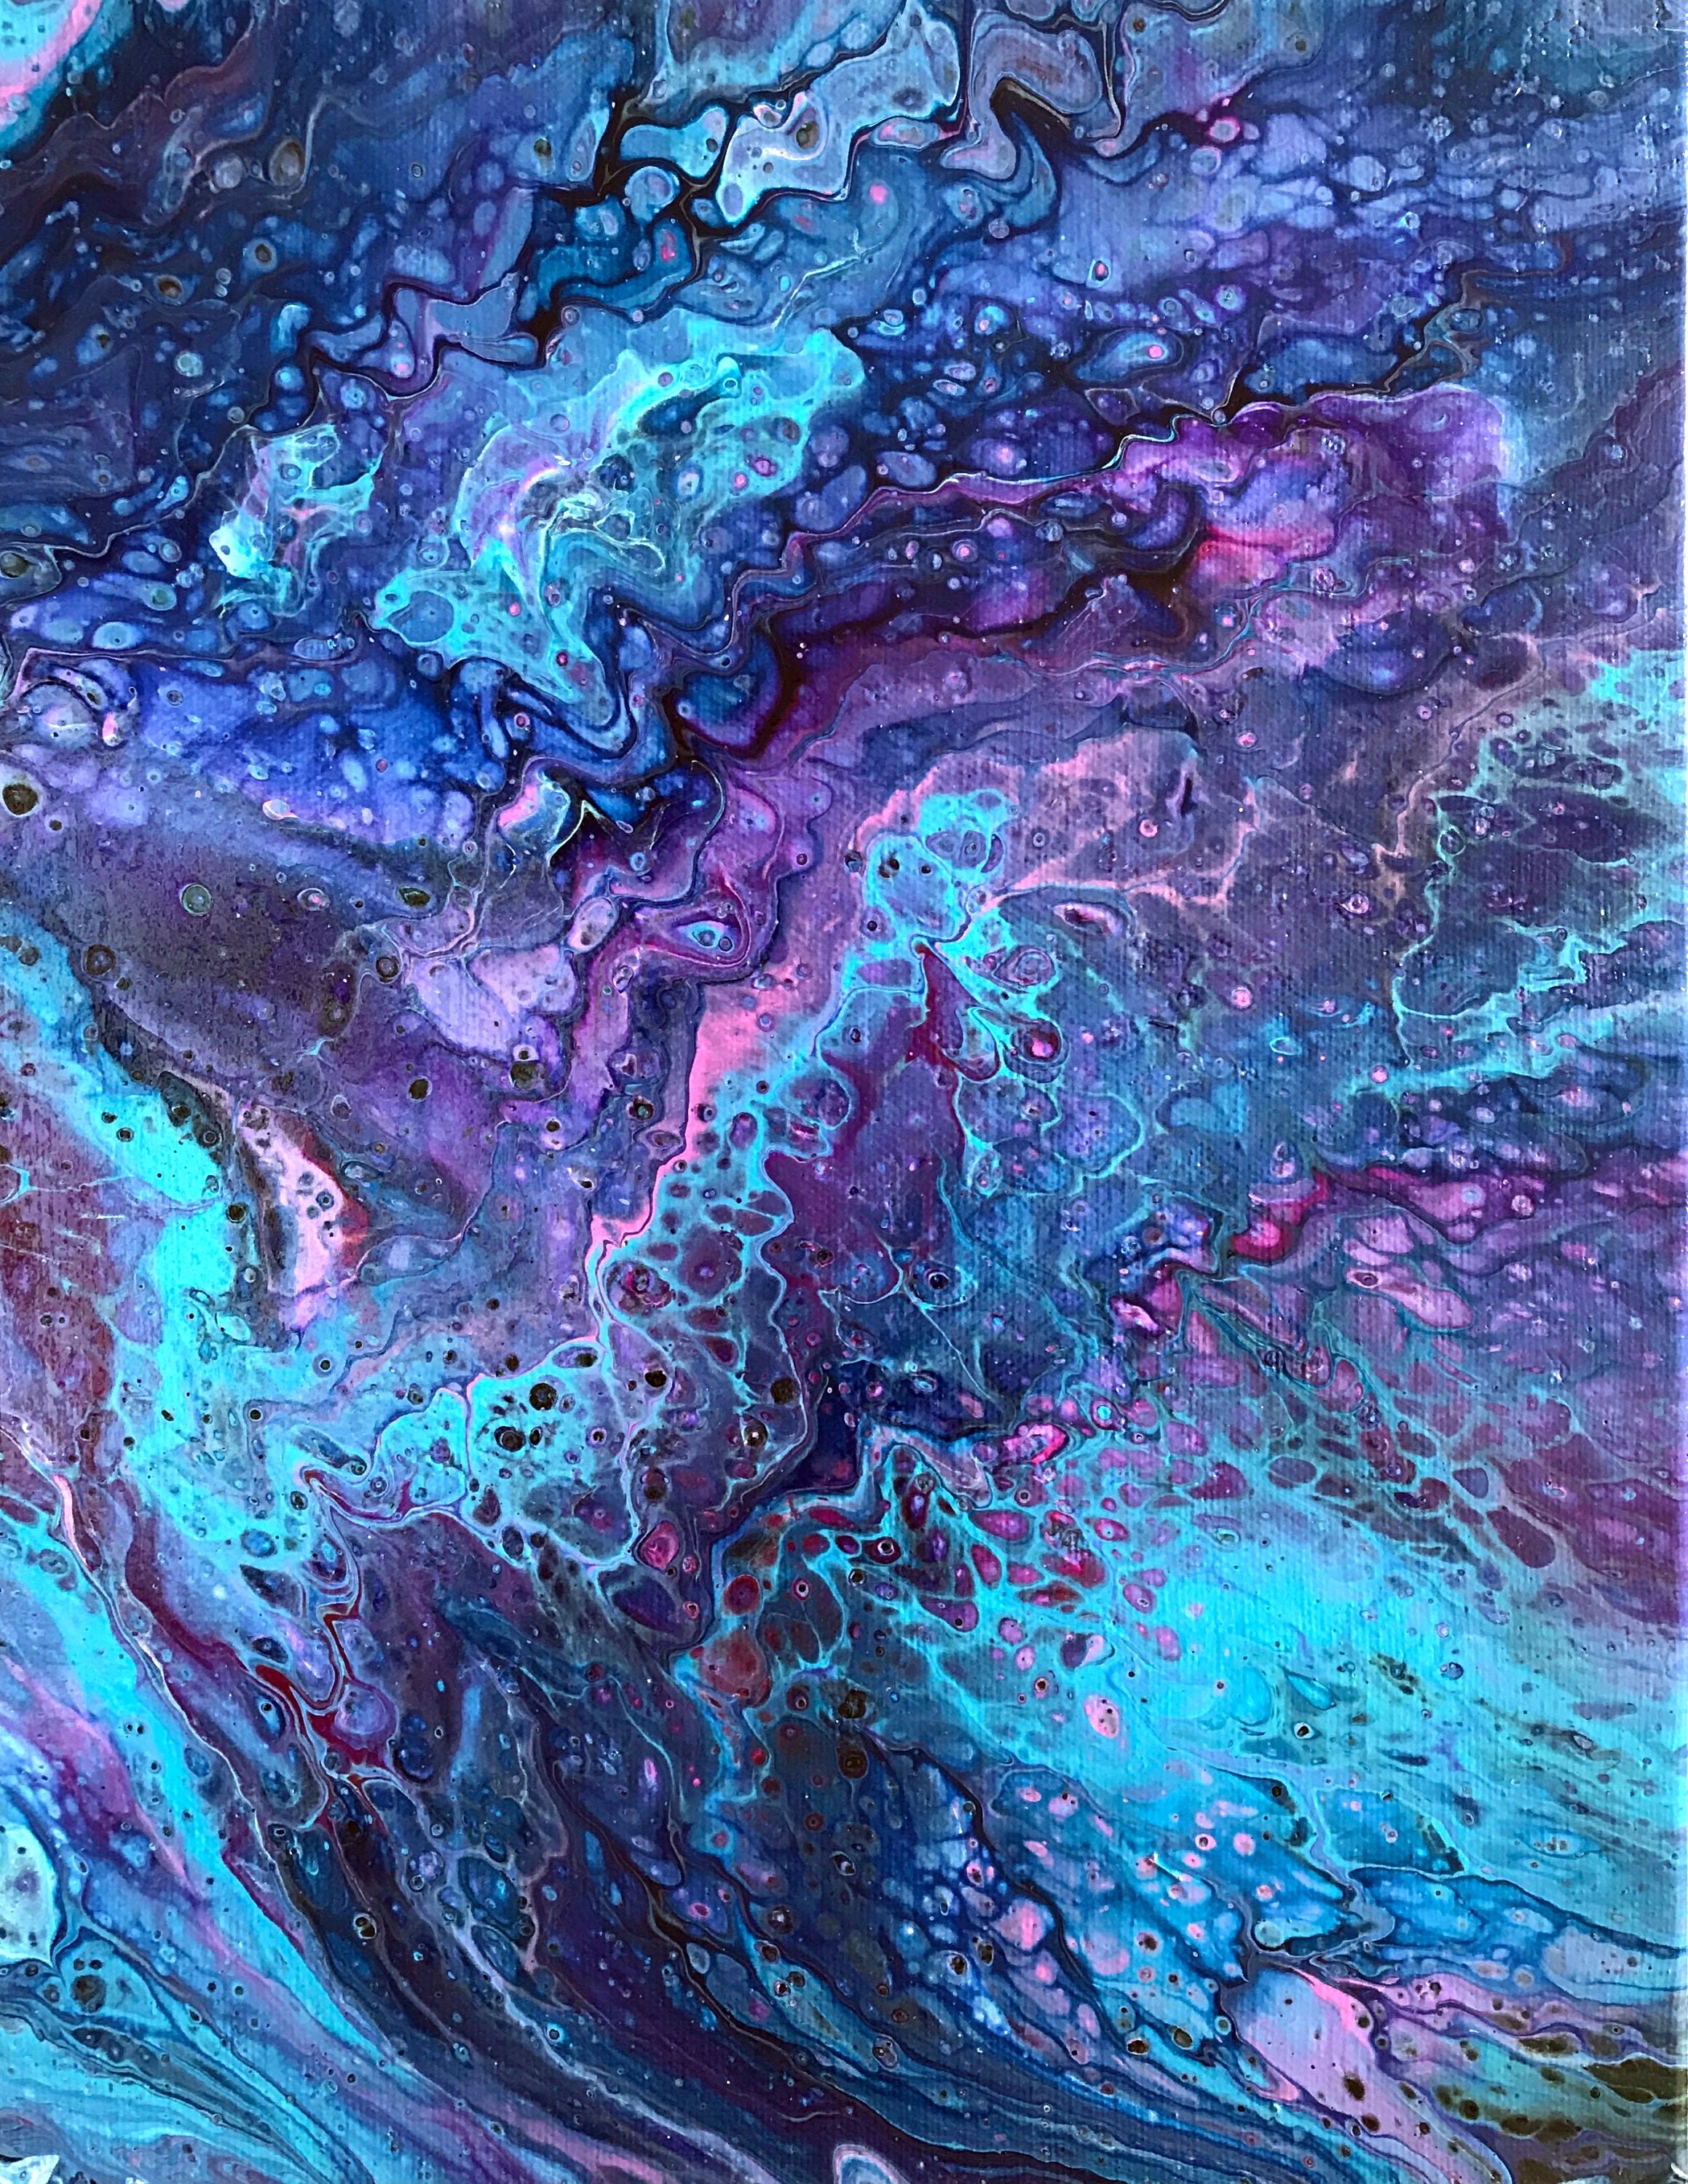 One of a Kind Abstract Painting on 11x14 Canvas in Gorgeous Purple, Blue,  Pink and White, Fluid Art Home Decor, Acrylic Paint Pour